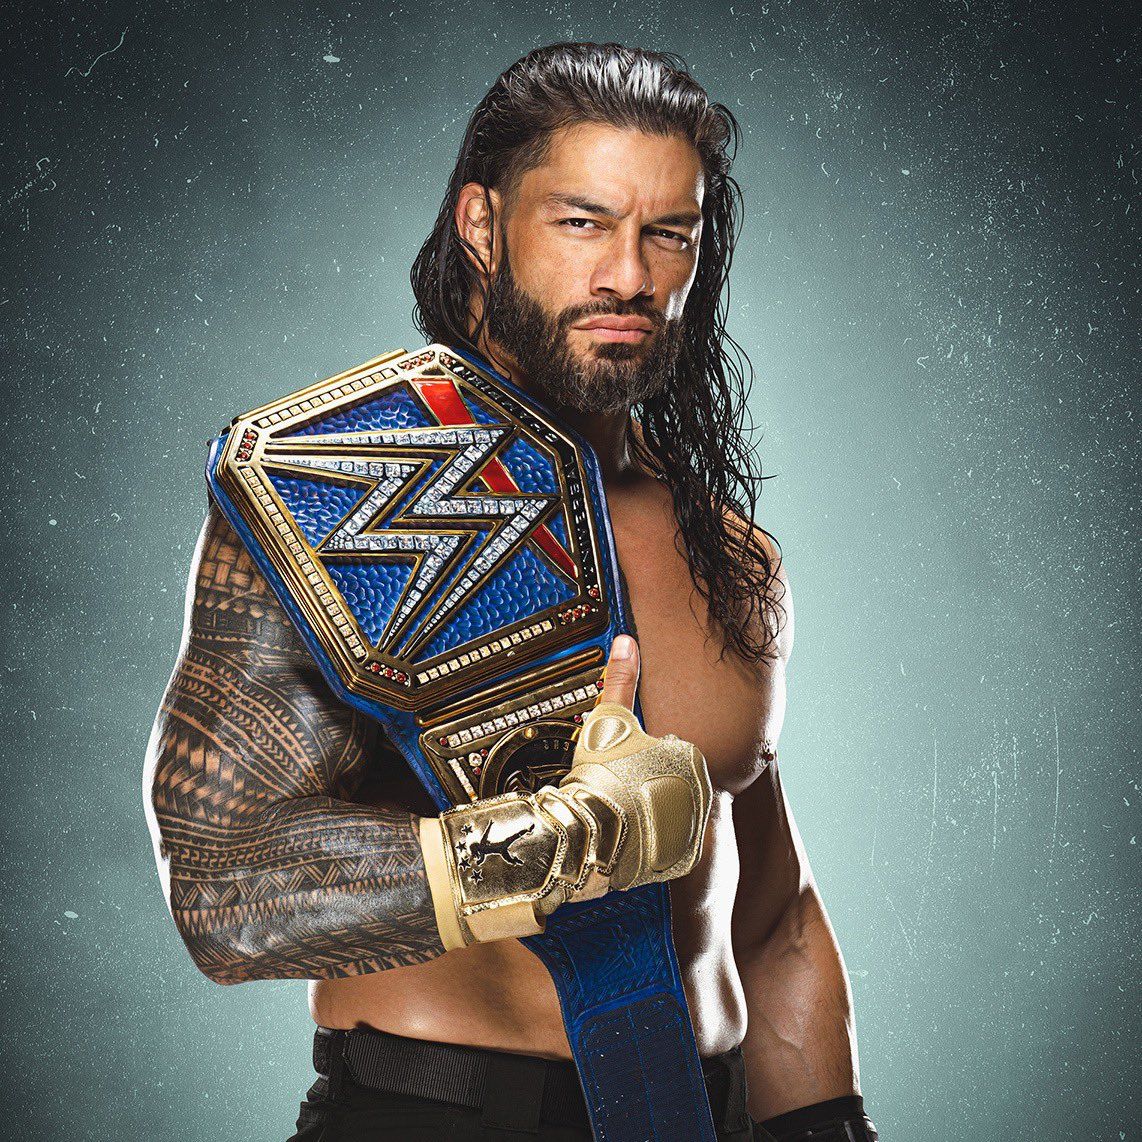 Roman Reigns. Undeniable. Main Event. Tribal Chief. #Smackdown